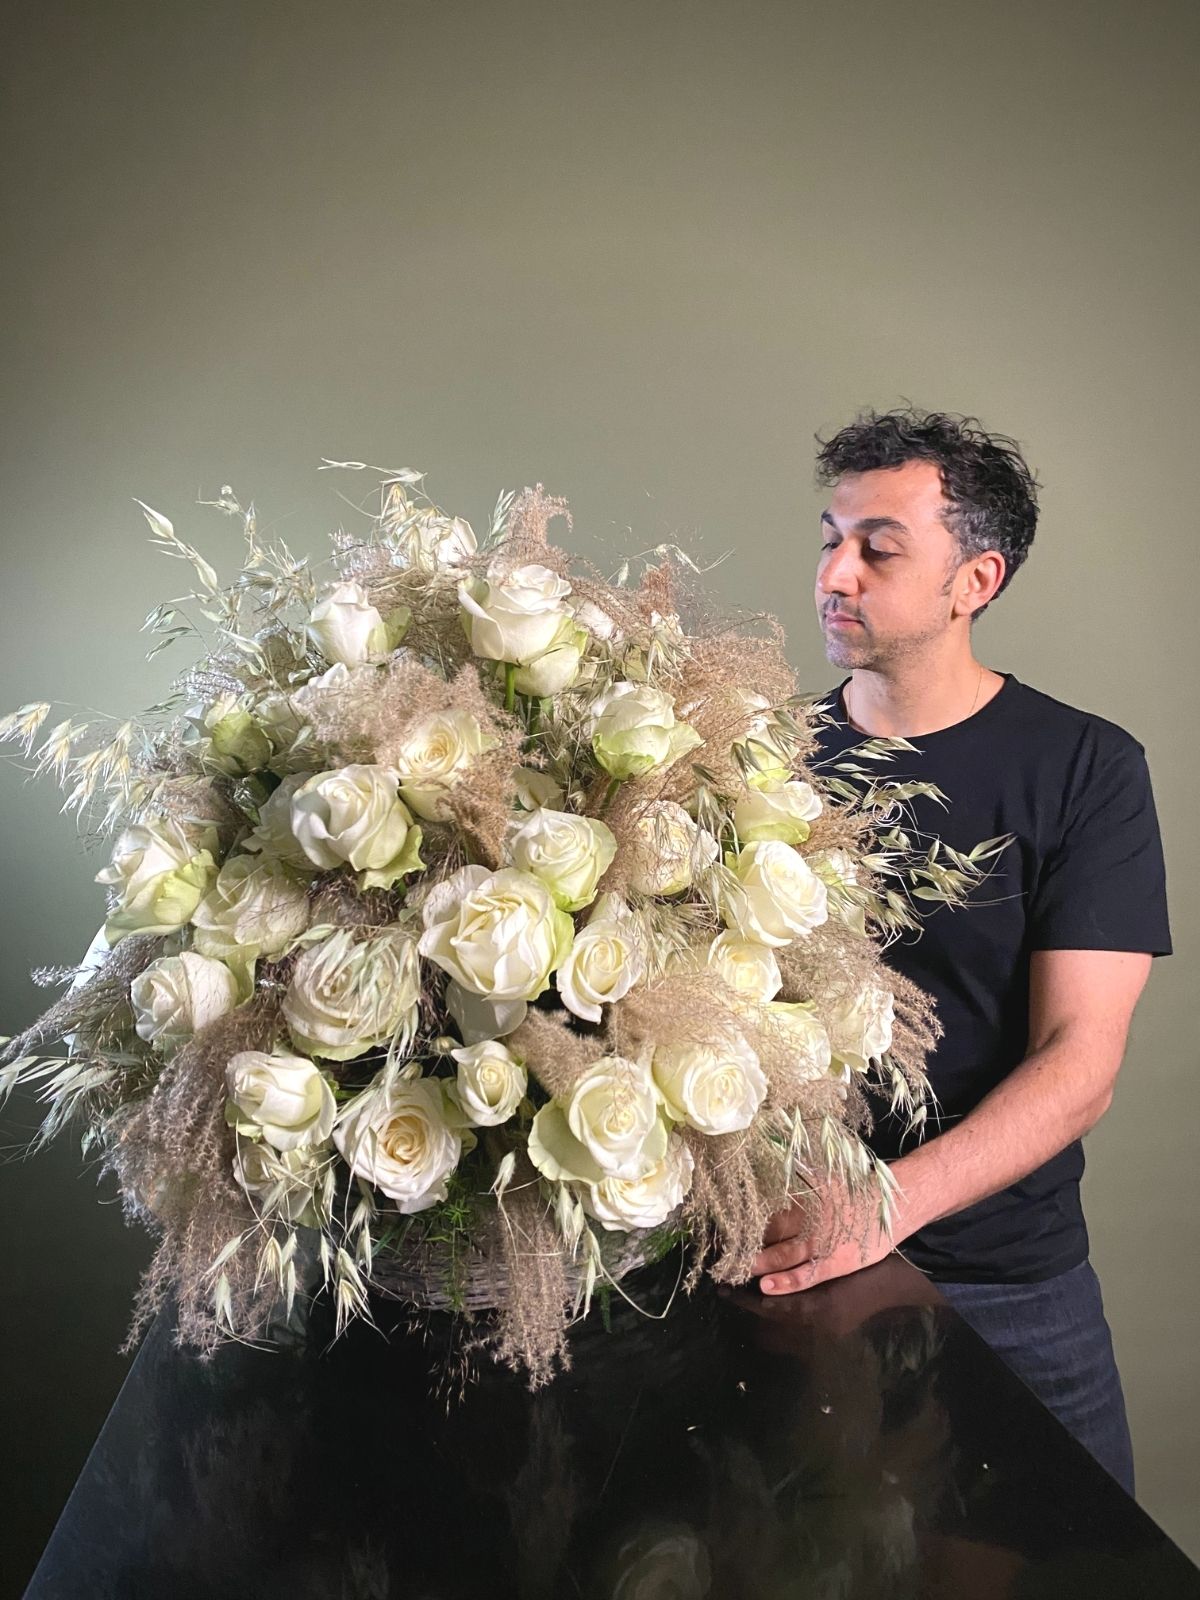 Dmitry Turcan on Thursd. - Snowstorm roses - A soft bouquet with Snowstorm+ roses